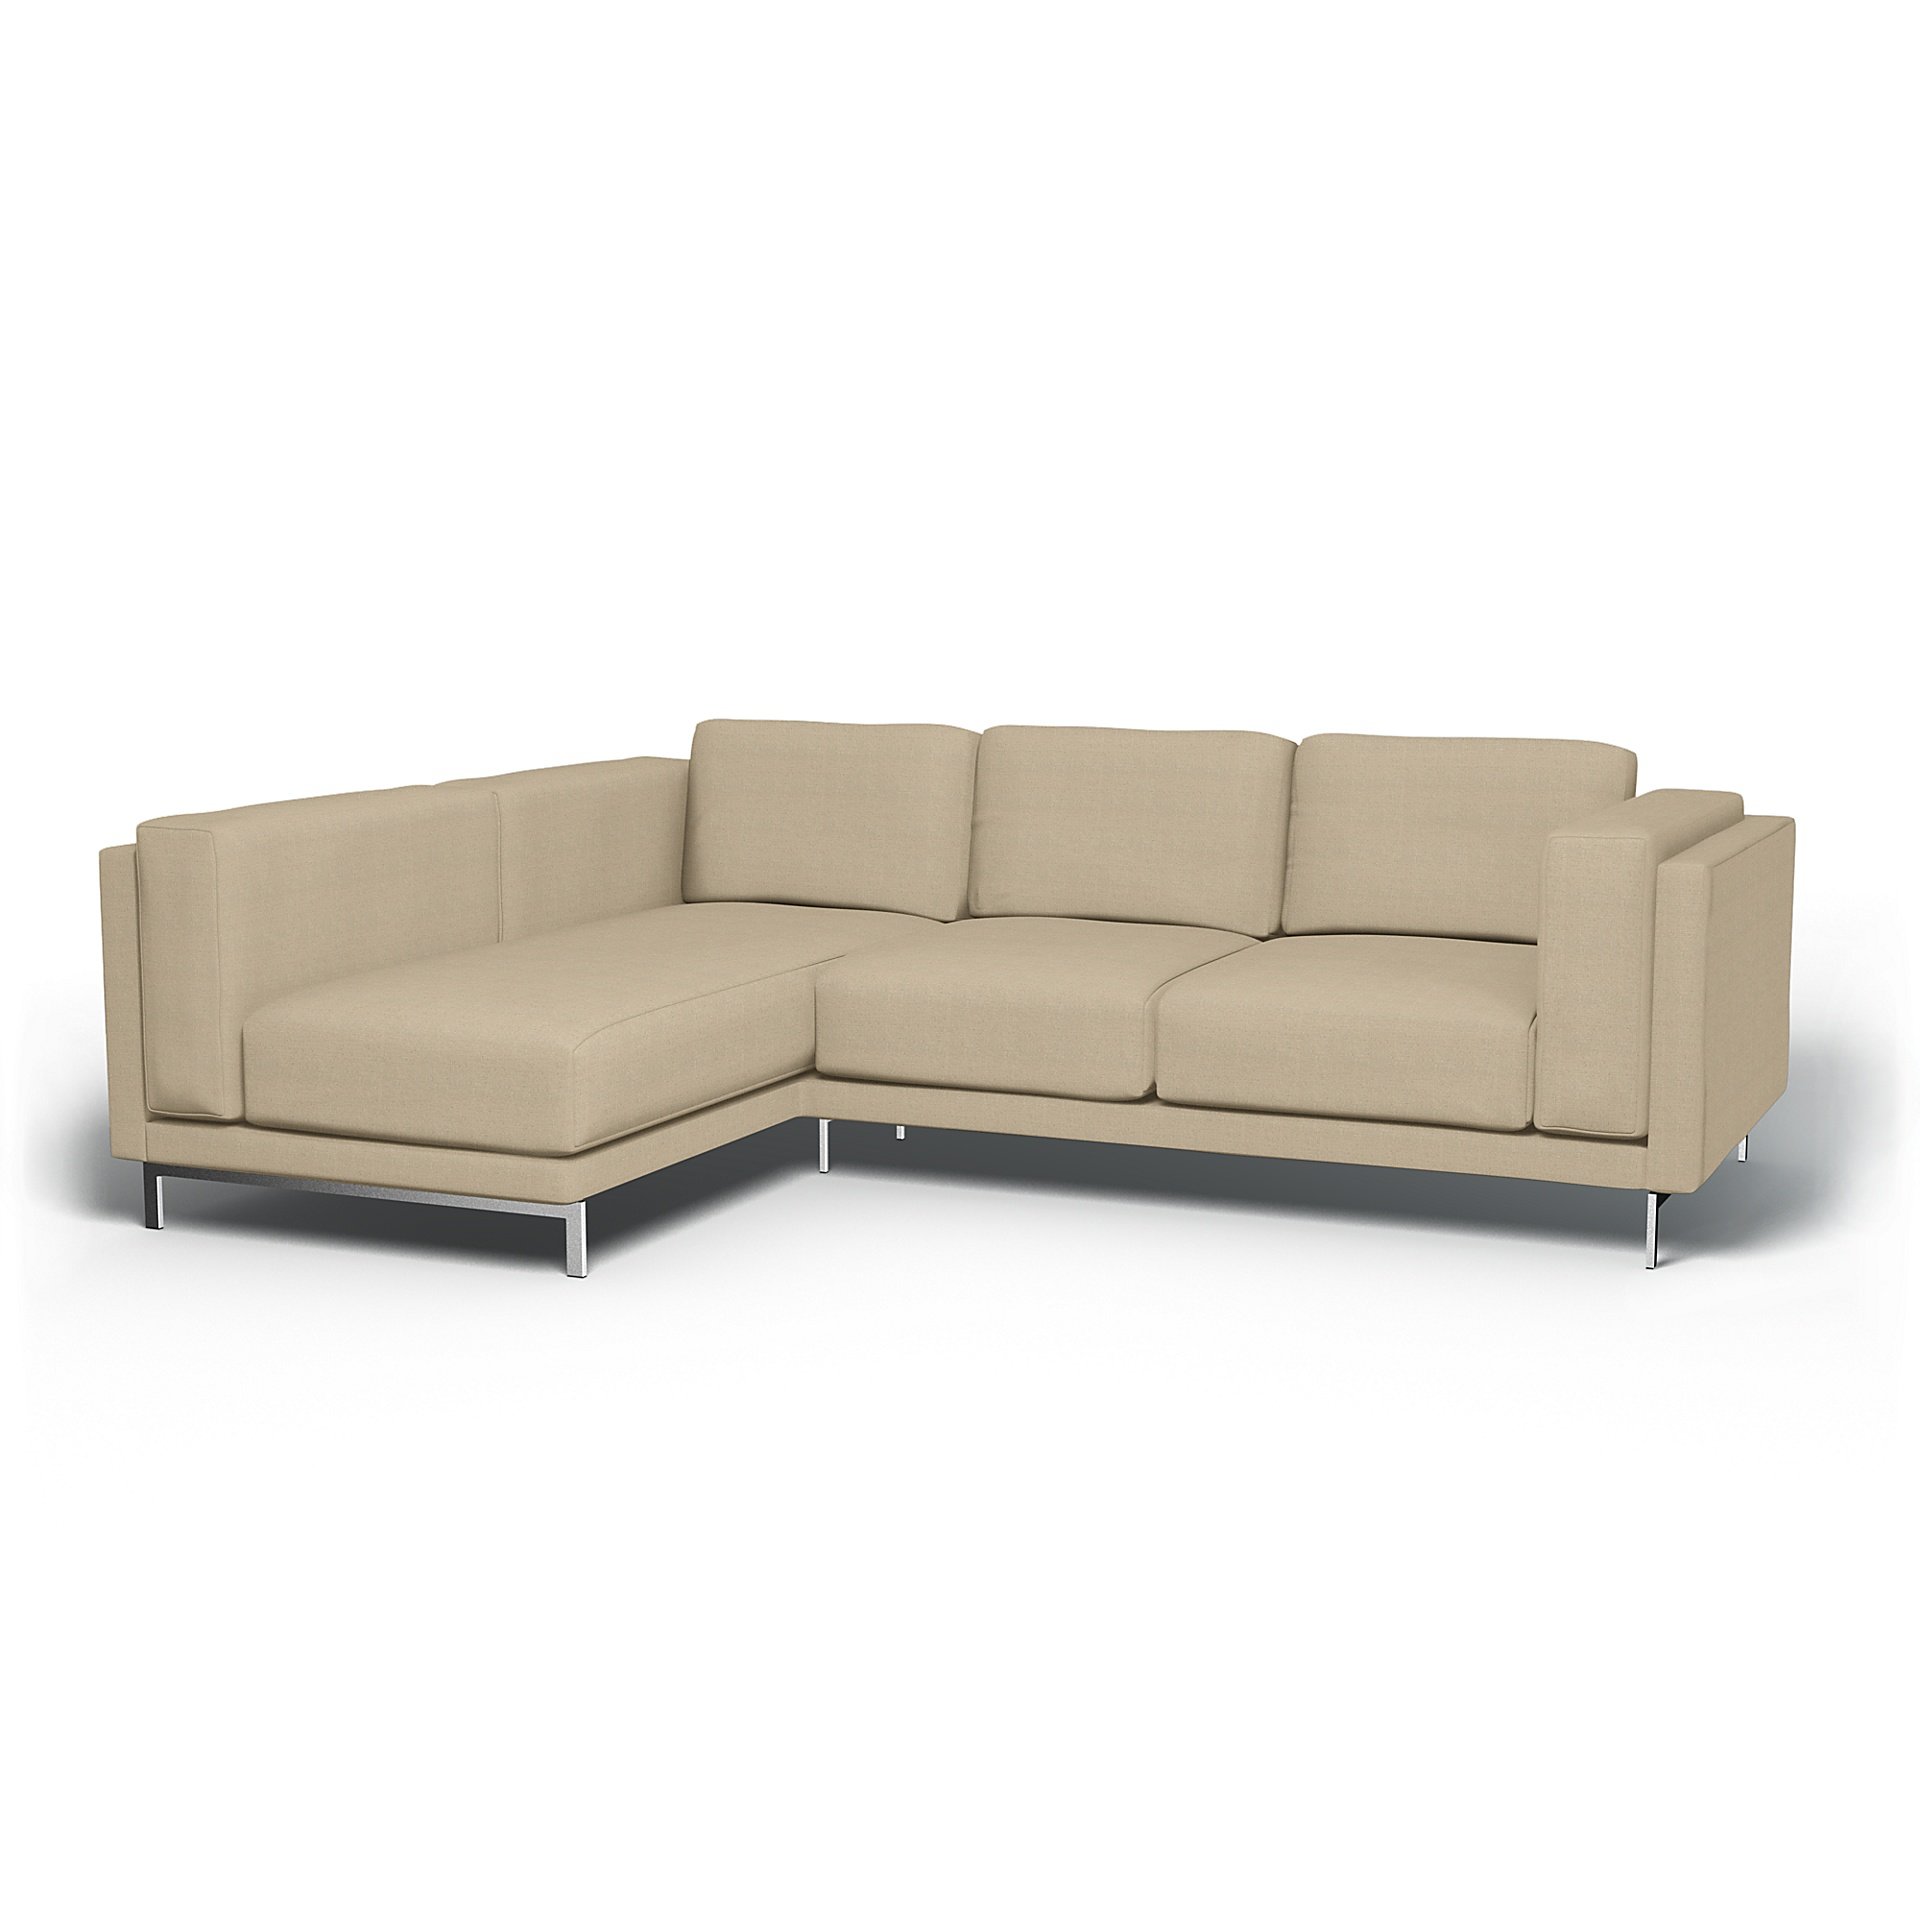 IKEA - Nockeby 3 Seater Sofa with Left Chaise Cover, Unbleached, Linen - Bemz